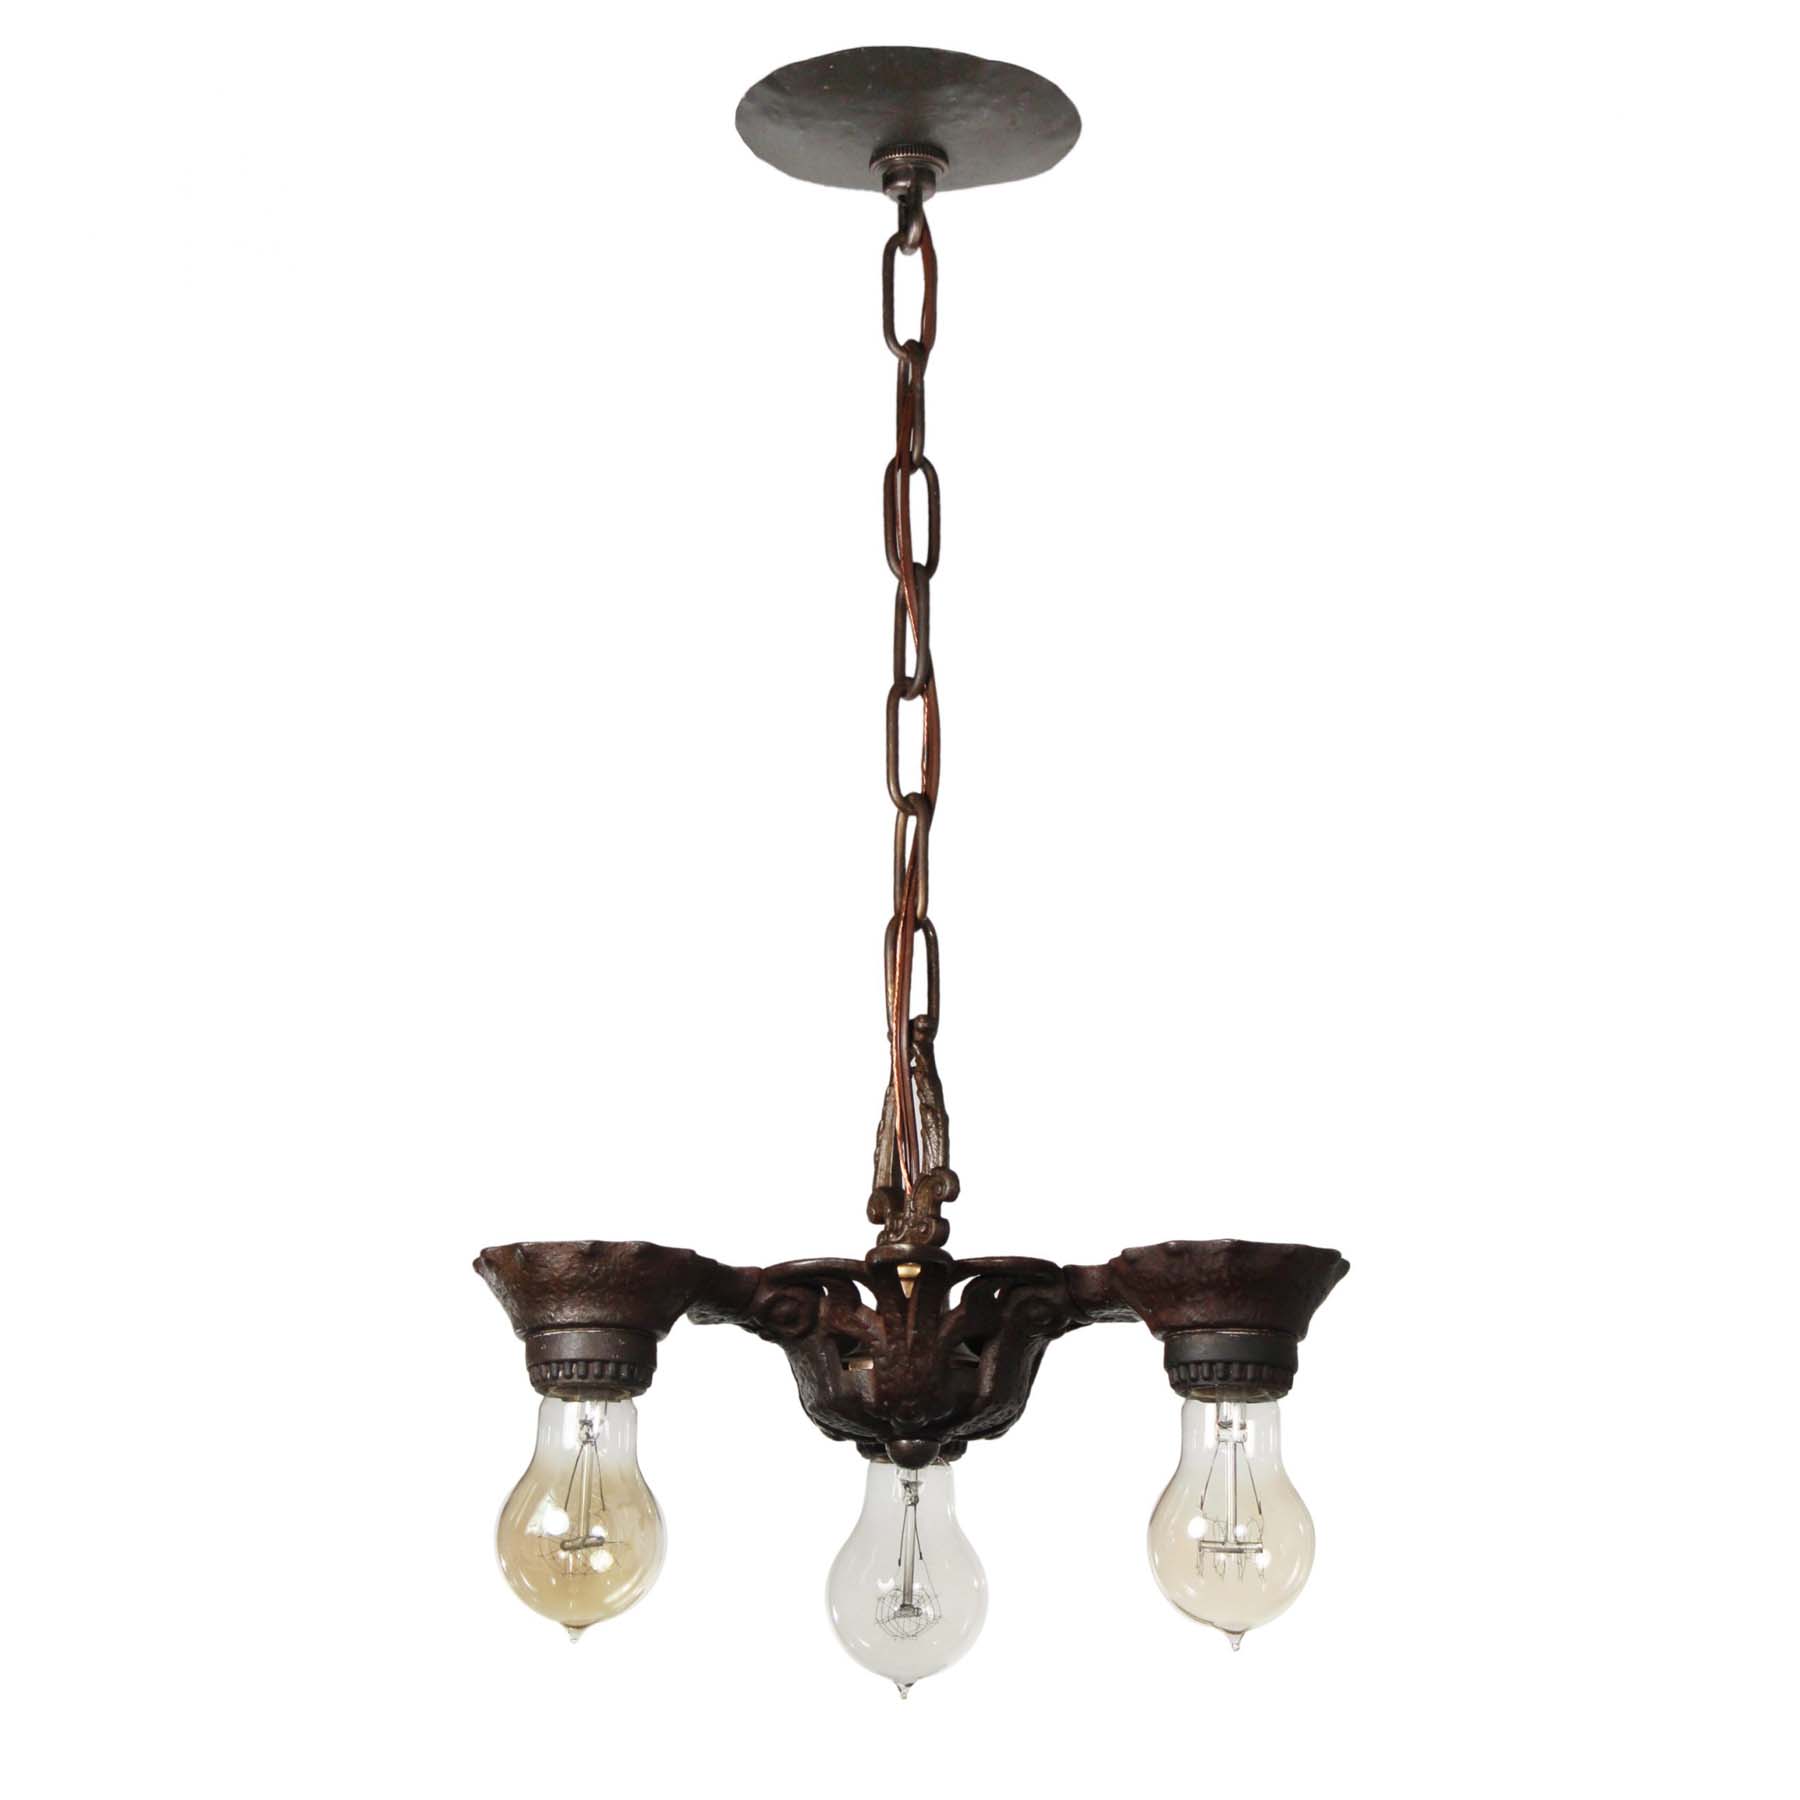 SOLD Antique Three-Light Chandelier with Exposed Bulbs-68003